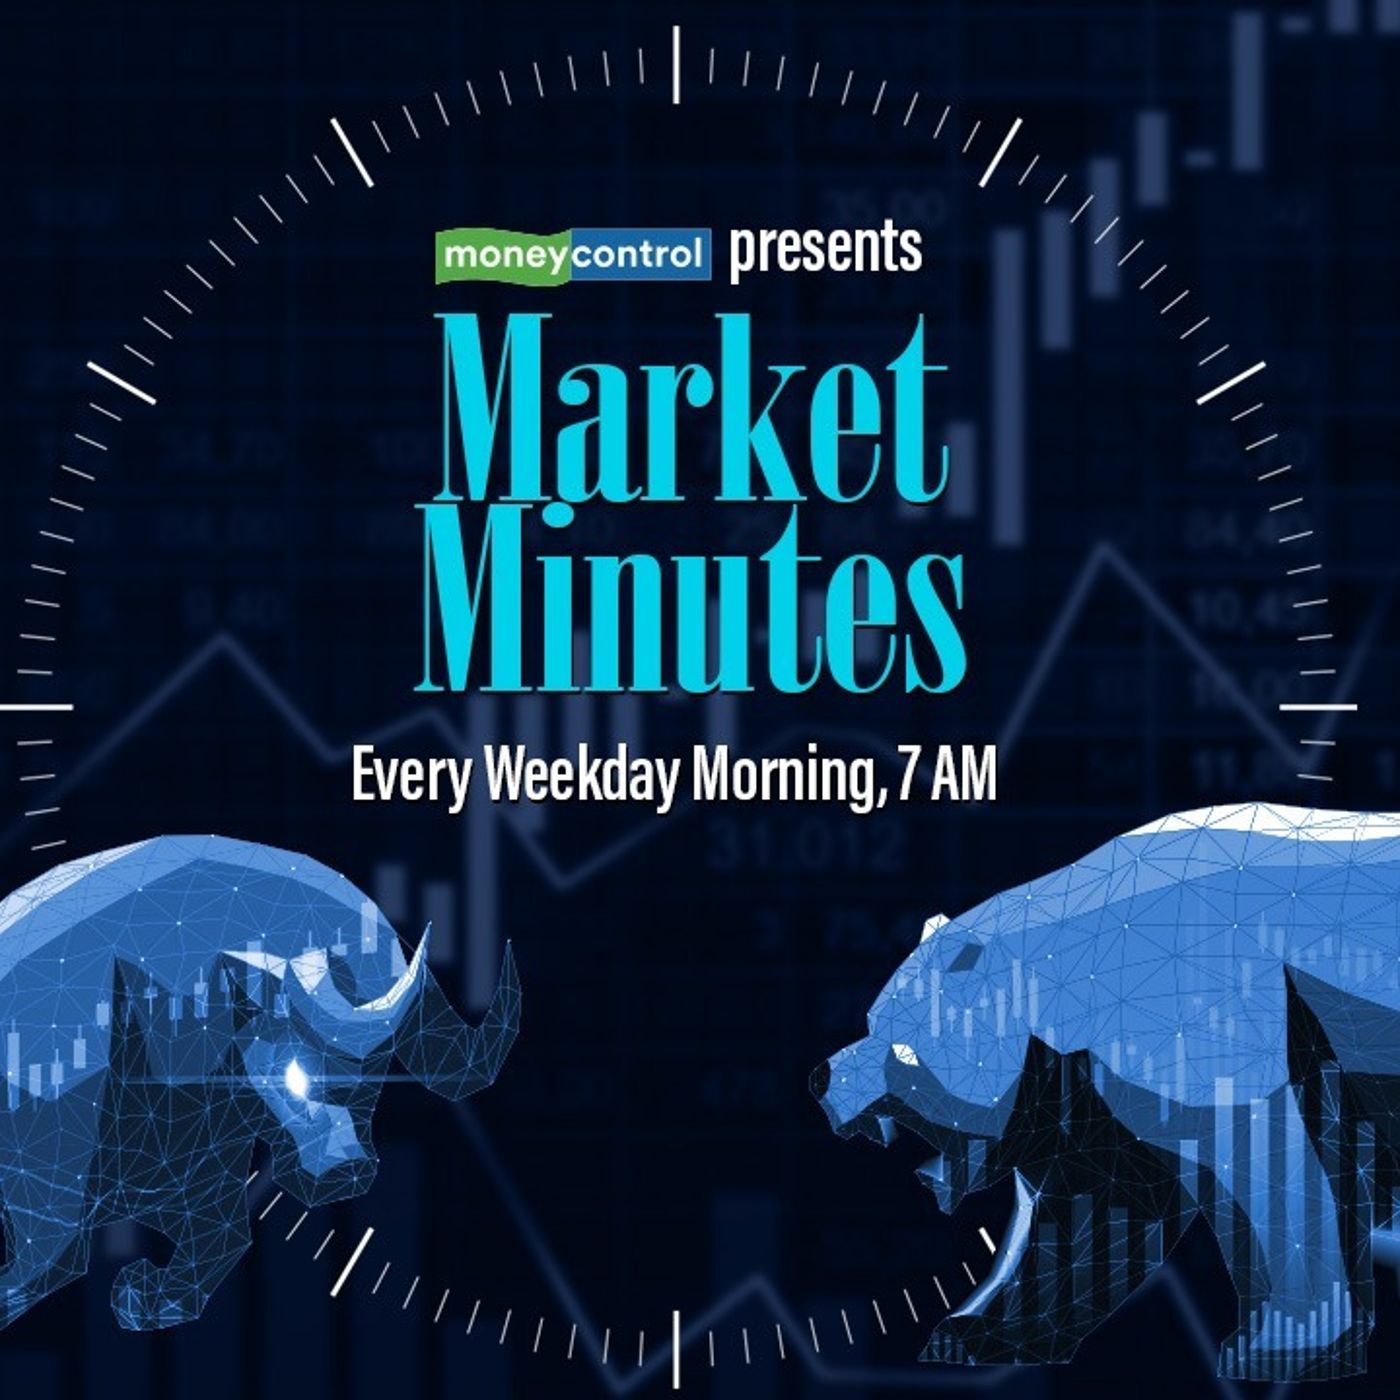 4202: BHEL, NHPC, Dr Reddy’s among top stocks to watch; F&O expiry, FY24-end to shape trends | Market Minutes